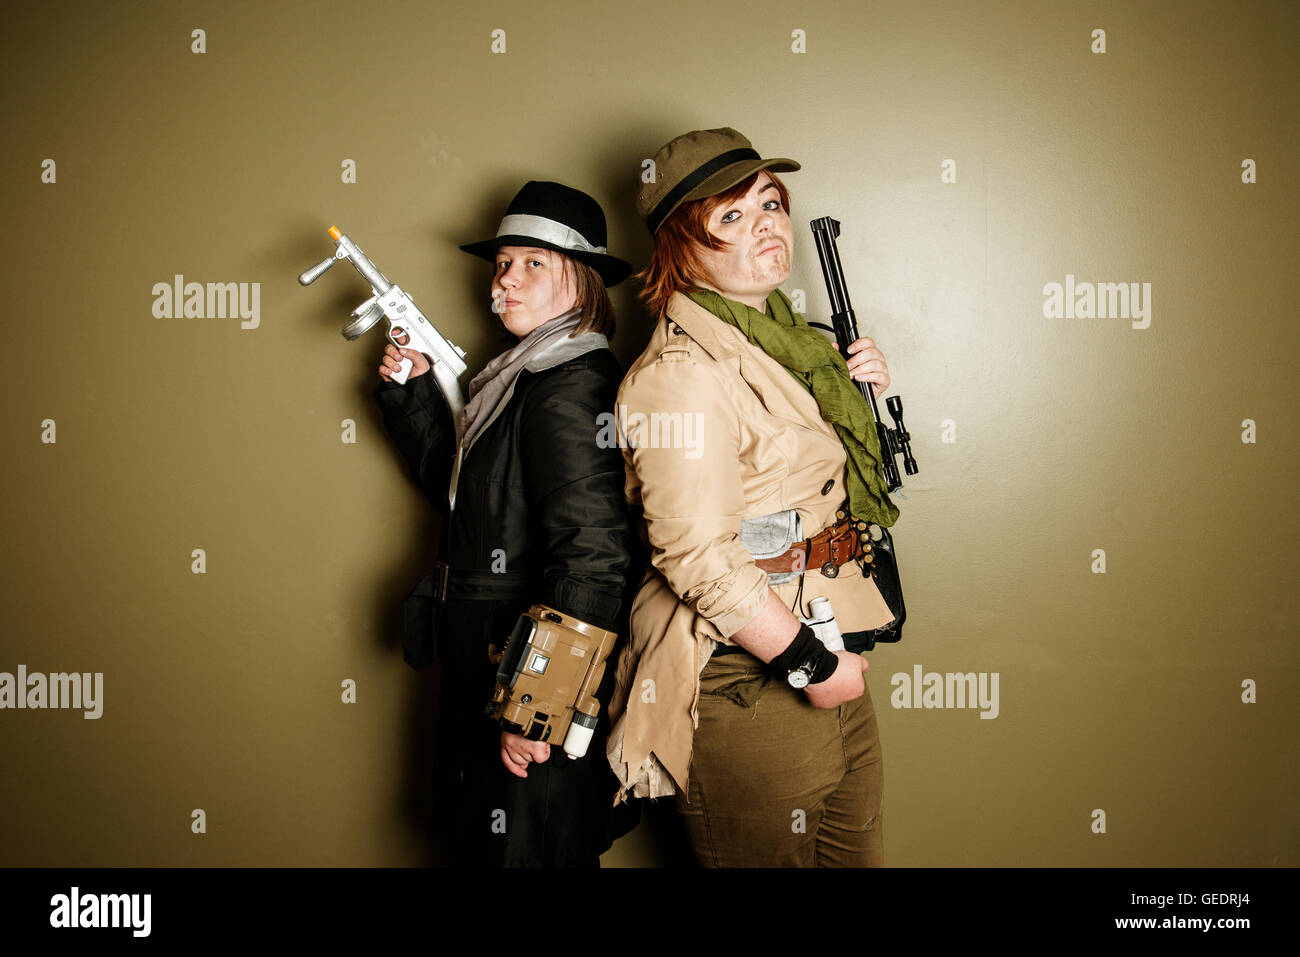 Two female Cosplayers dressed as characters from the video game , Fallout 4  pose for photographs at a Comic Con convention Stock Photo - Alamy